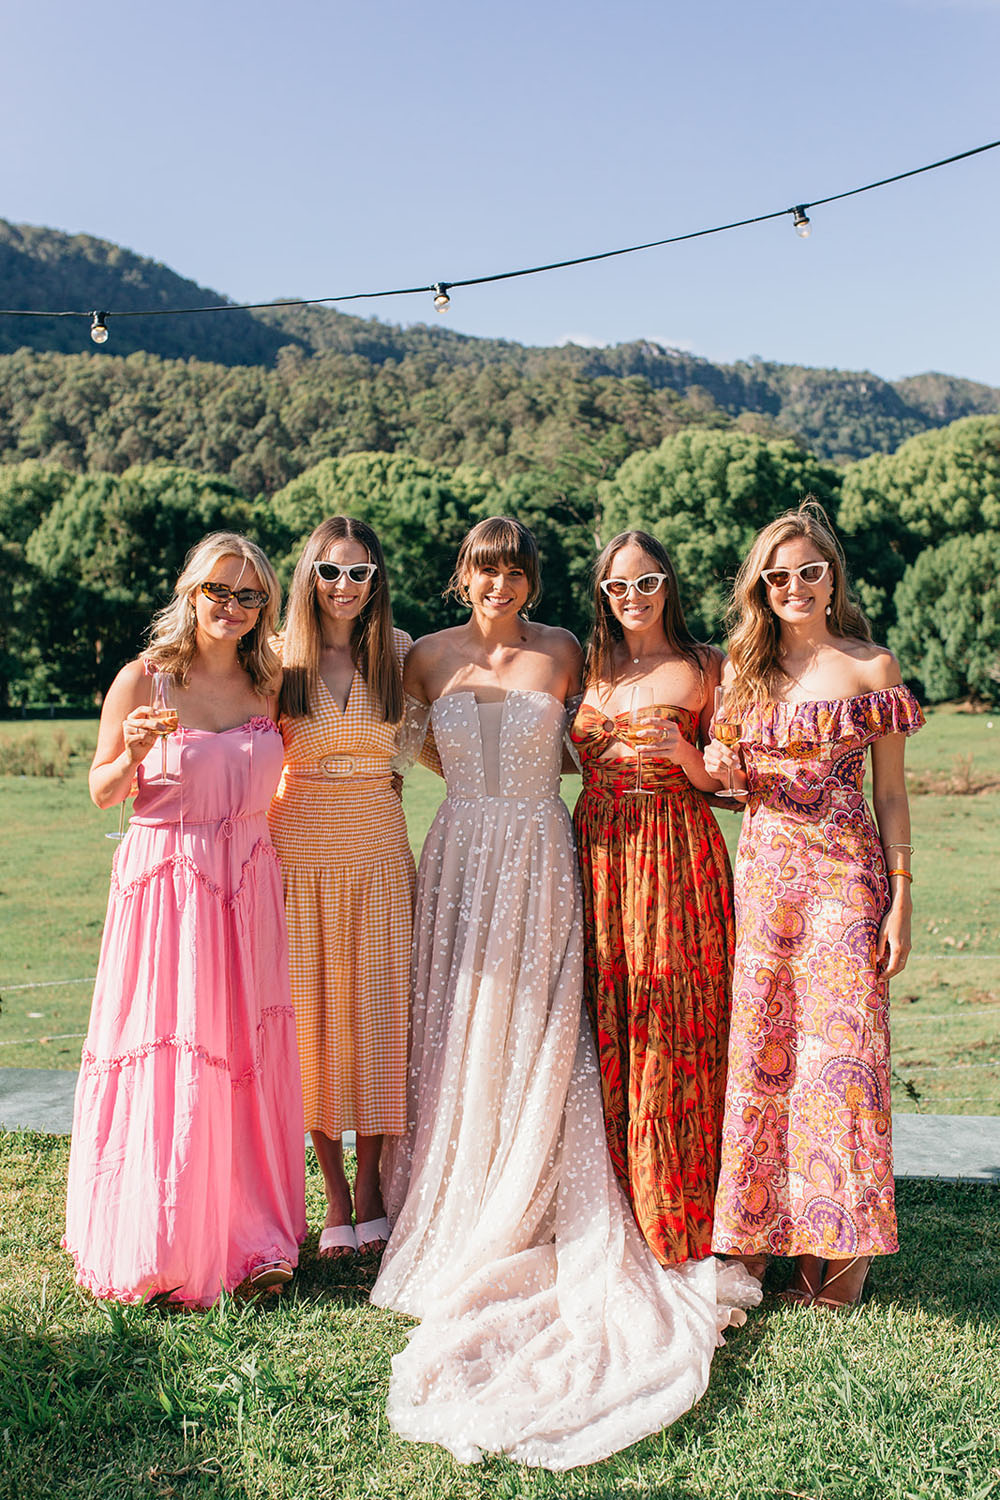 Bride with colorful wedding guest dresses